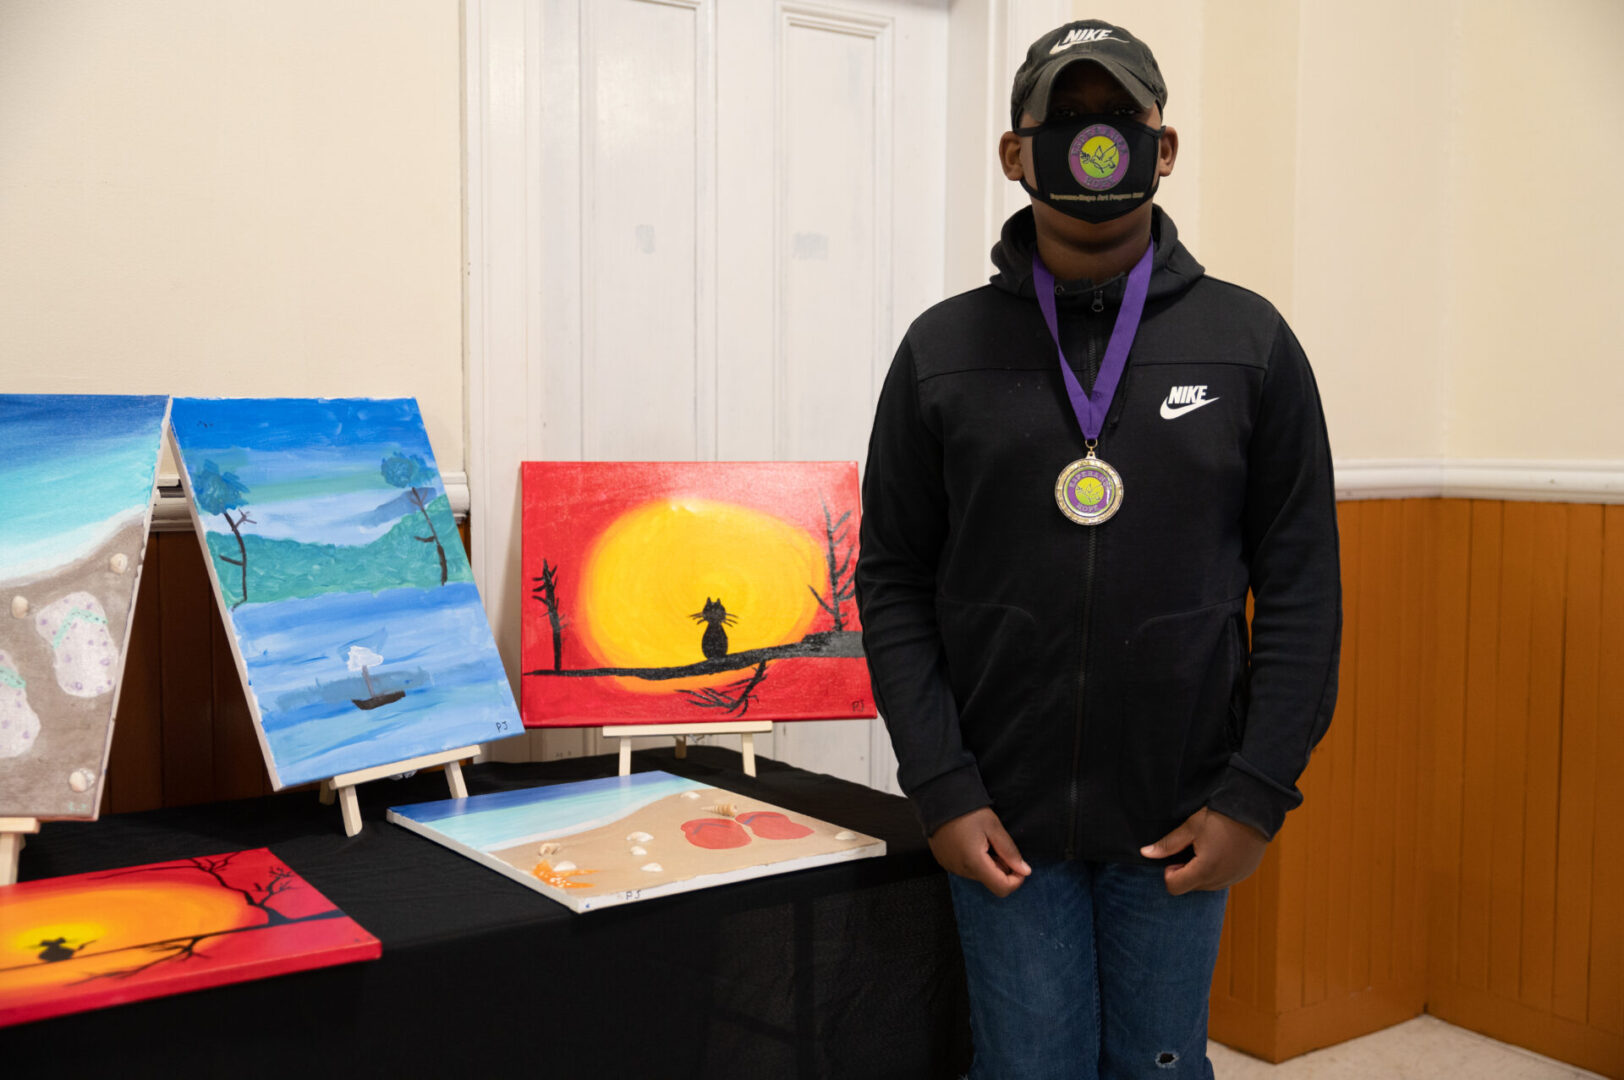 A boy in a jacket and wearing a medal, standing at the table with paintings